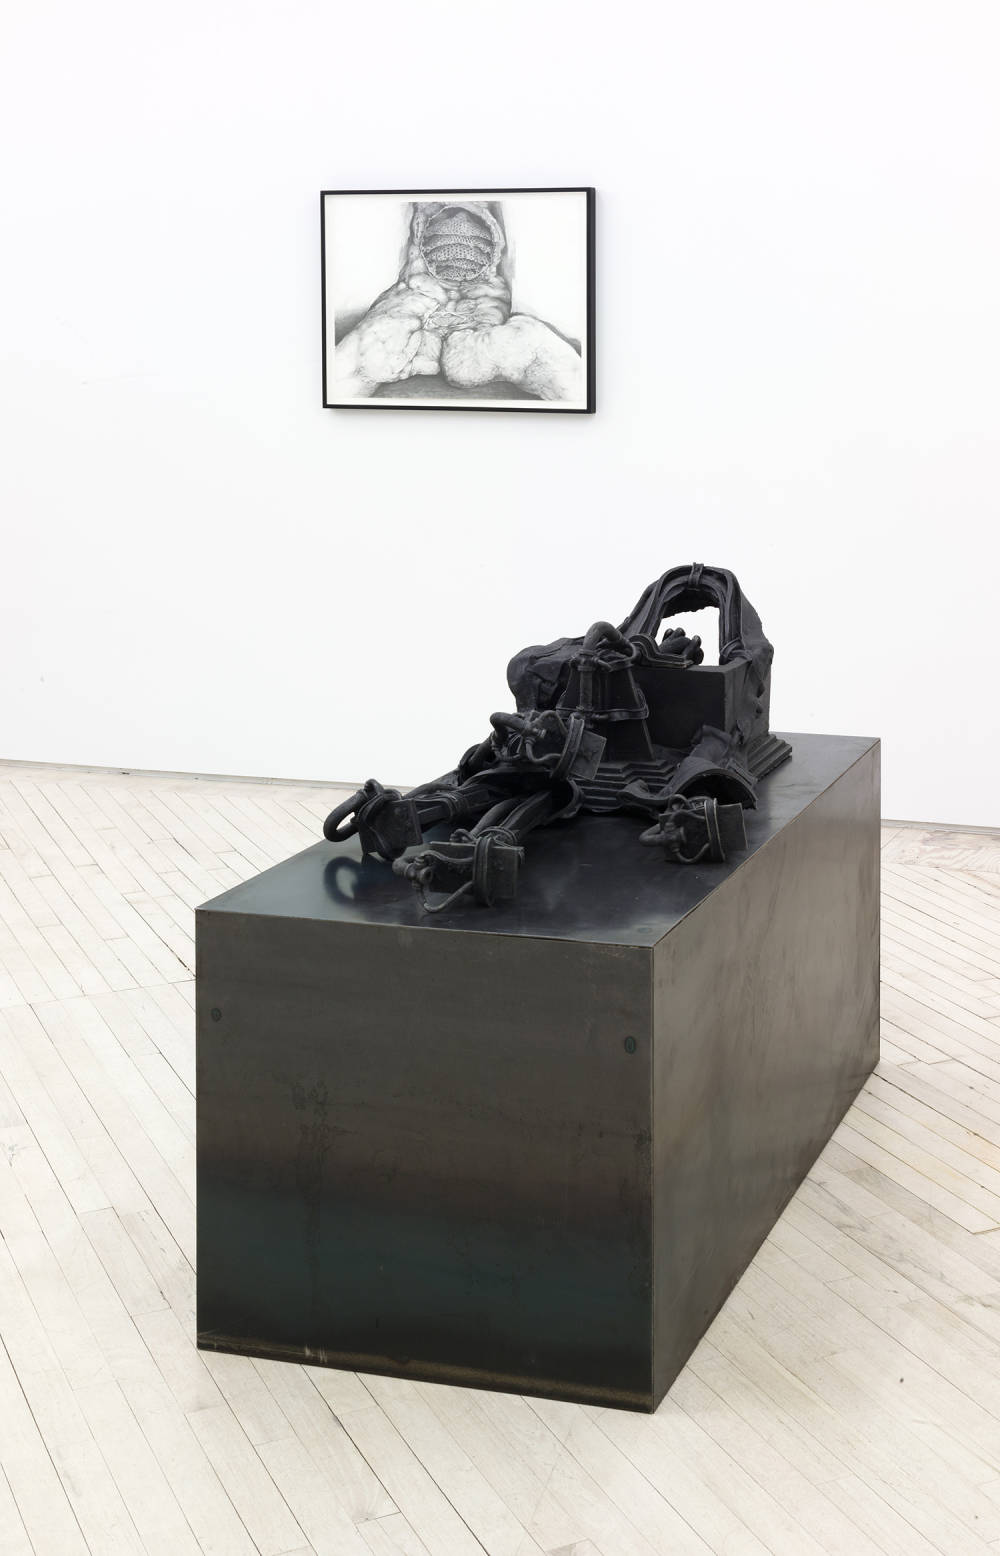 Installation view of a large black sculpture in the foreground and a black and white drawing in the distance. The sculpture has a sleek black metallic, rectangular cube base and on top of it is a complex black object comprised of stirrups or braces and architectural features like low steps and boxes. The drawing at a distance appears to be a mutilated torso, opened up at the abdomen, and perhaps burned or flayed.